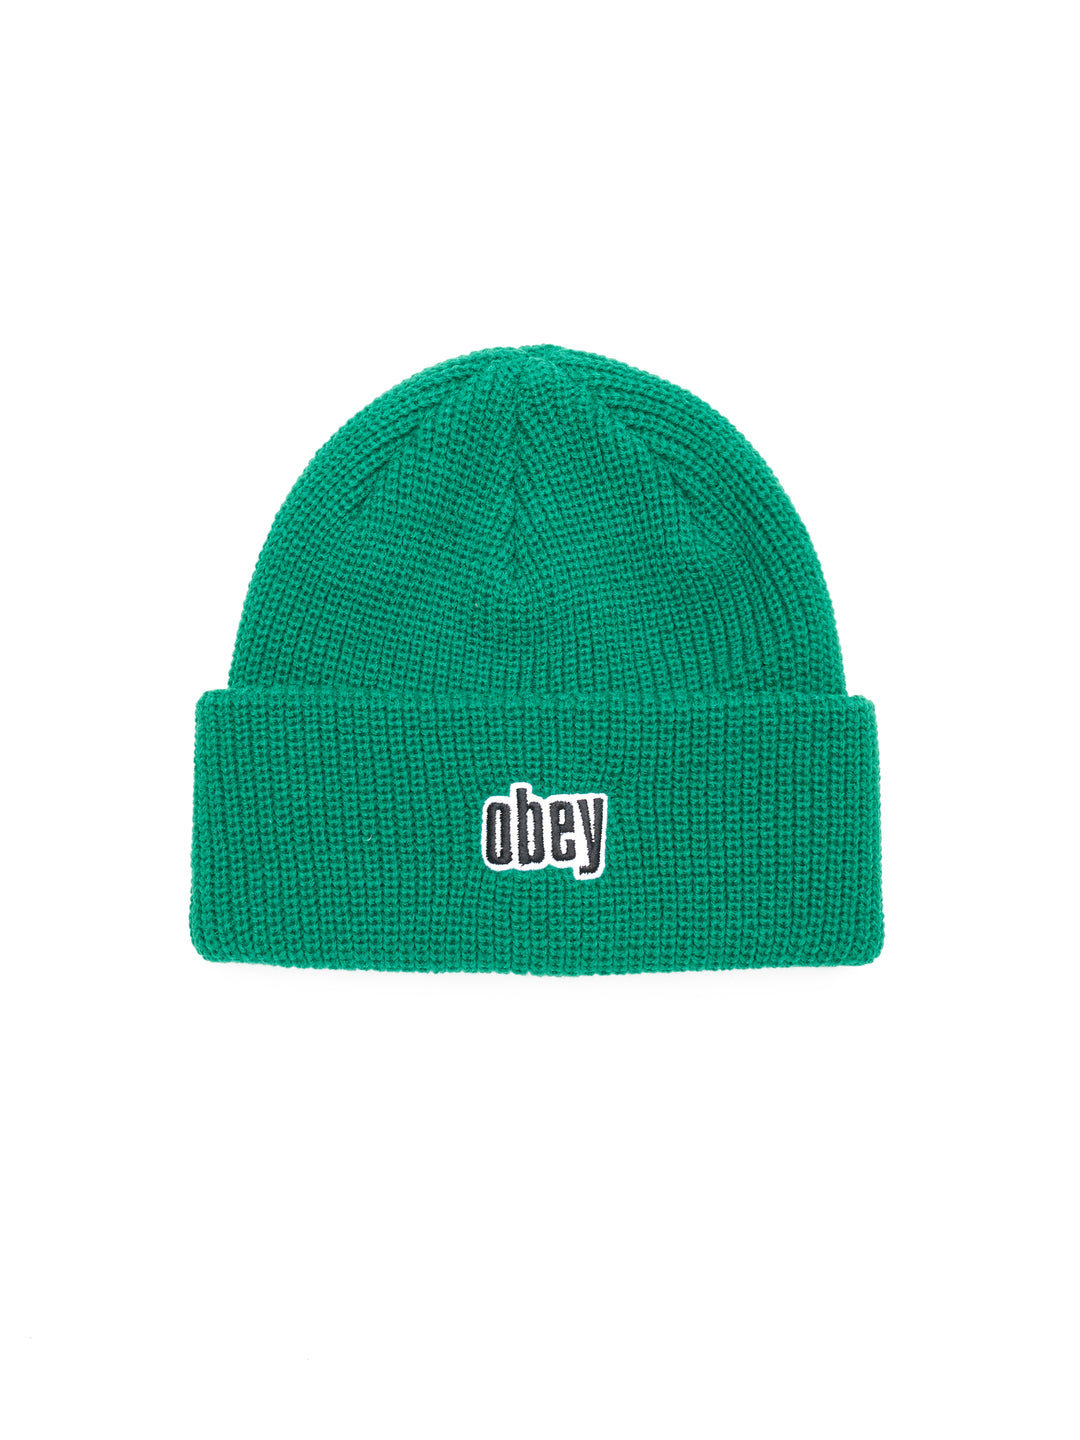 Jungle Beanie | Growth Green - Main Image Number 1 of 2